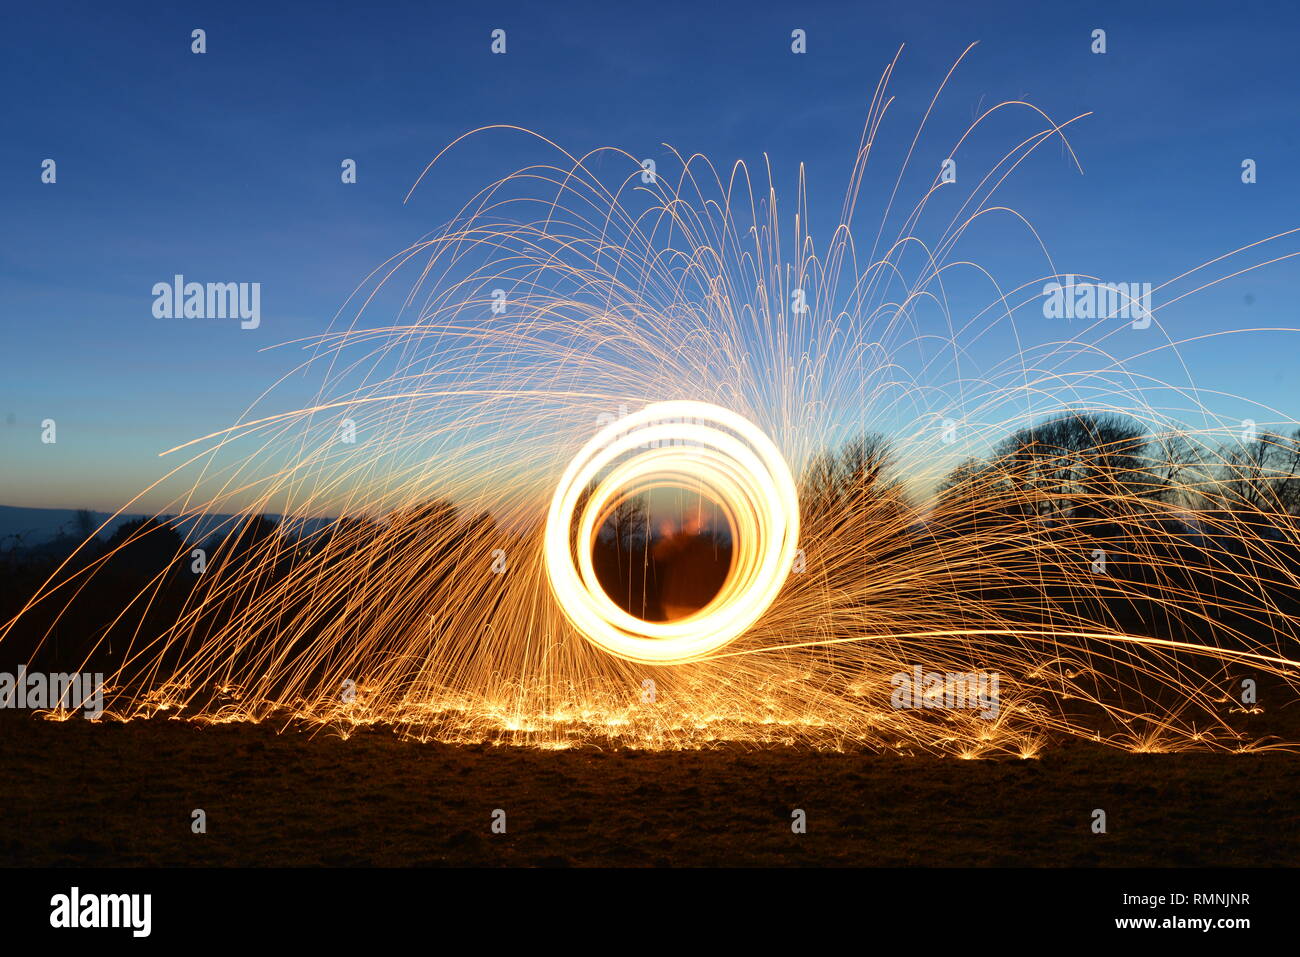 Steel wool photography. Light trails created by sparks during a long exposure photograph of burning steel wool. Stock Photo